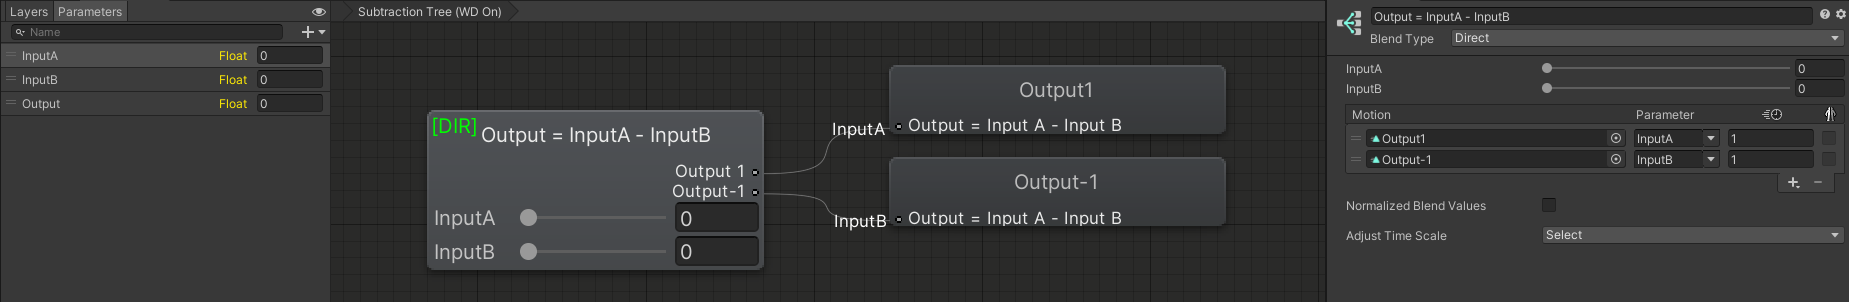 An example of subtracting two values by animating the Output AAP in two animation children in a Direct Blend Tree.